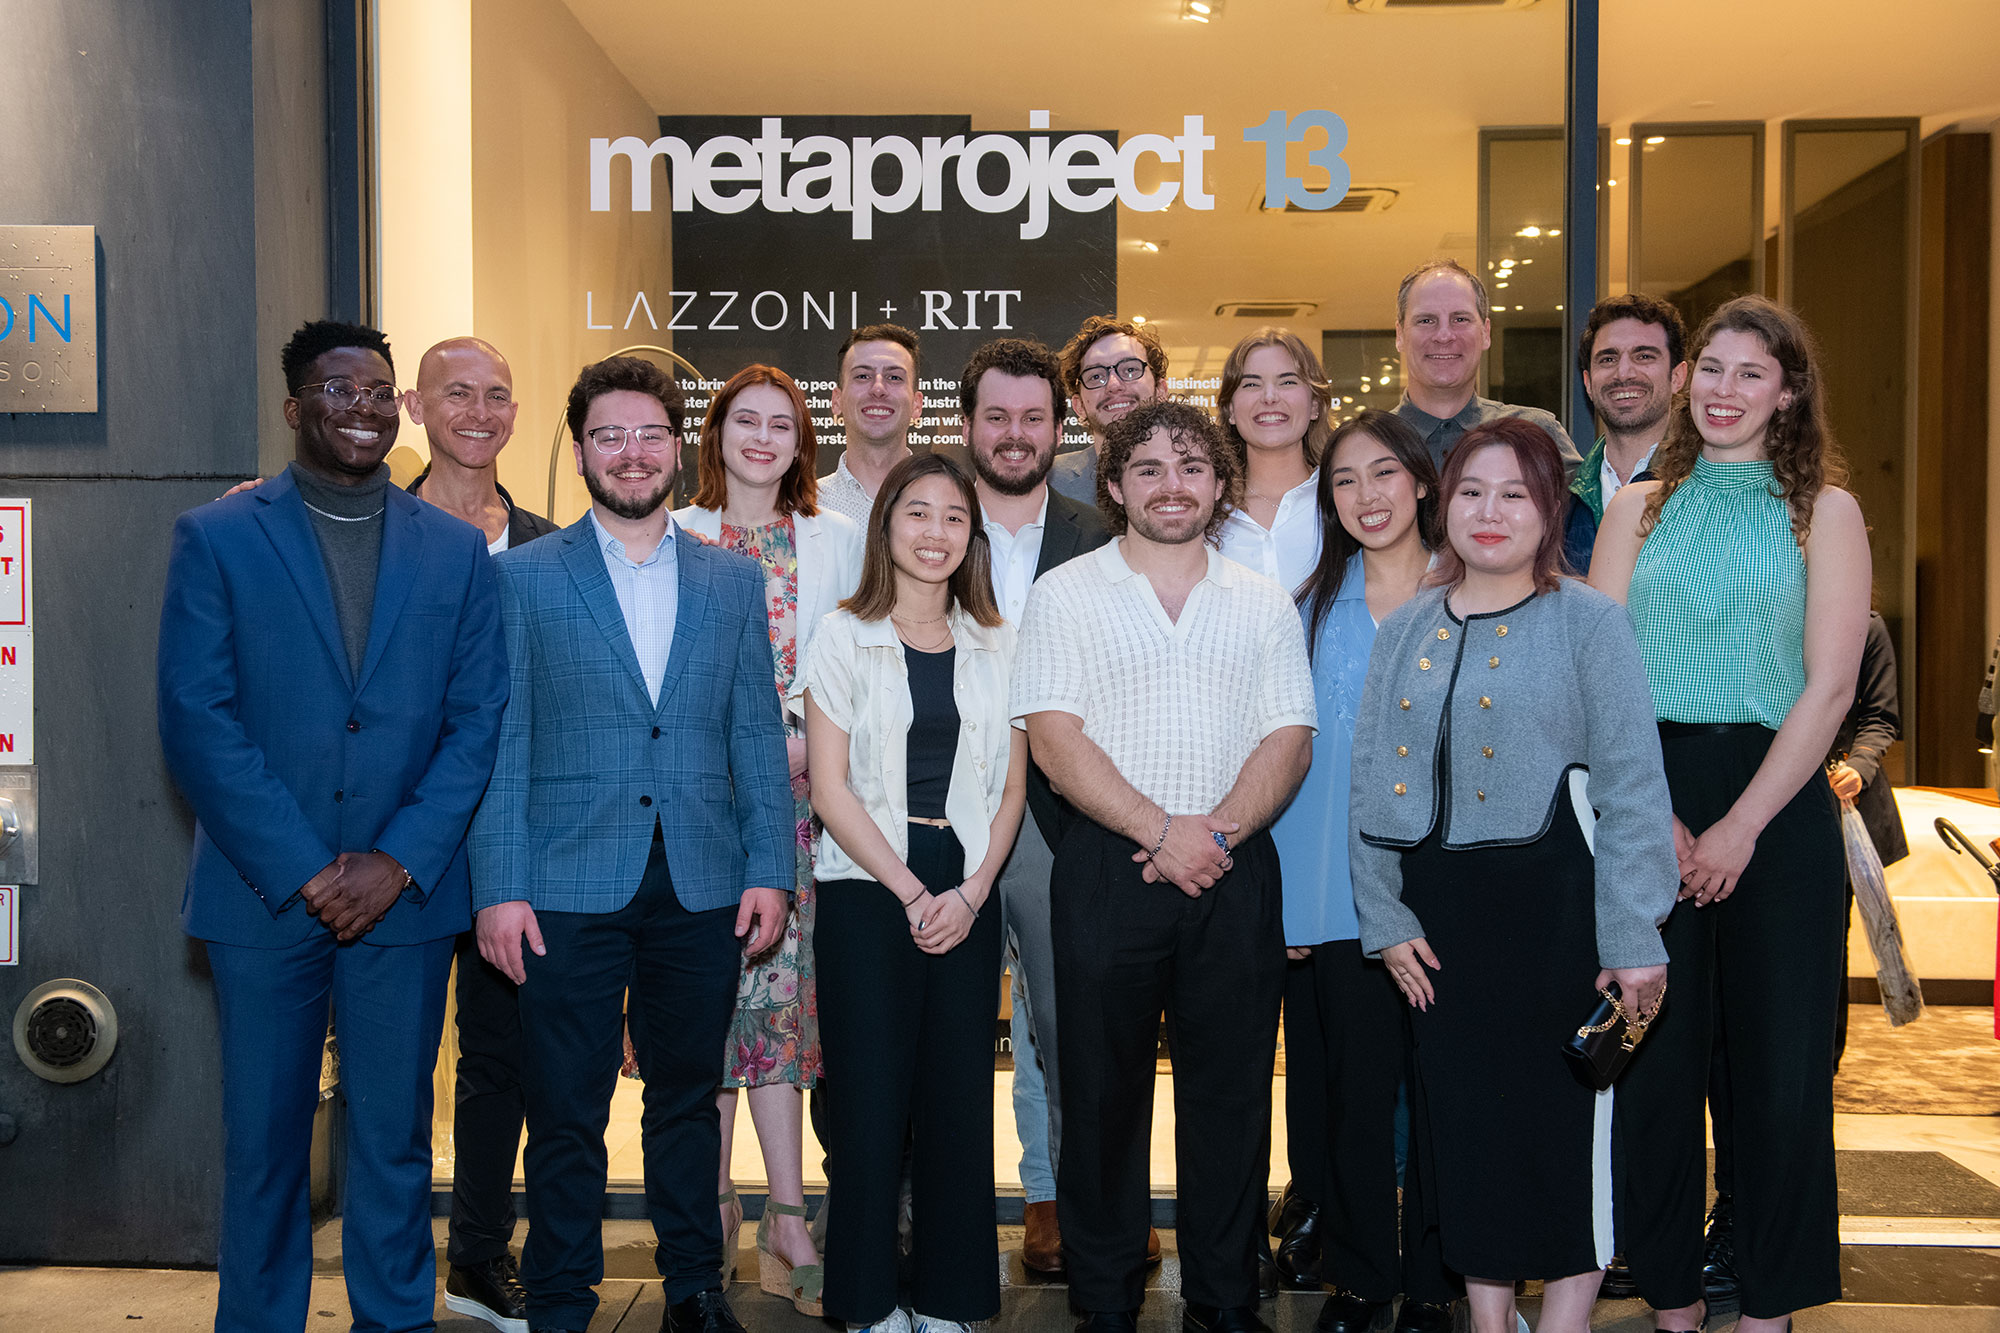 a group of people standing in front of a glass window that says metaproject 13